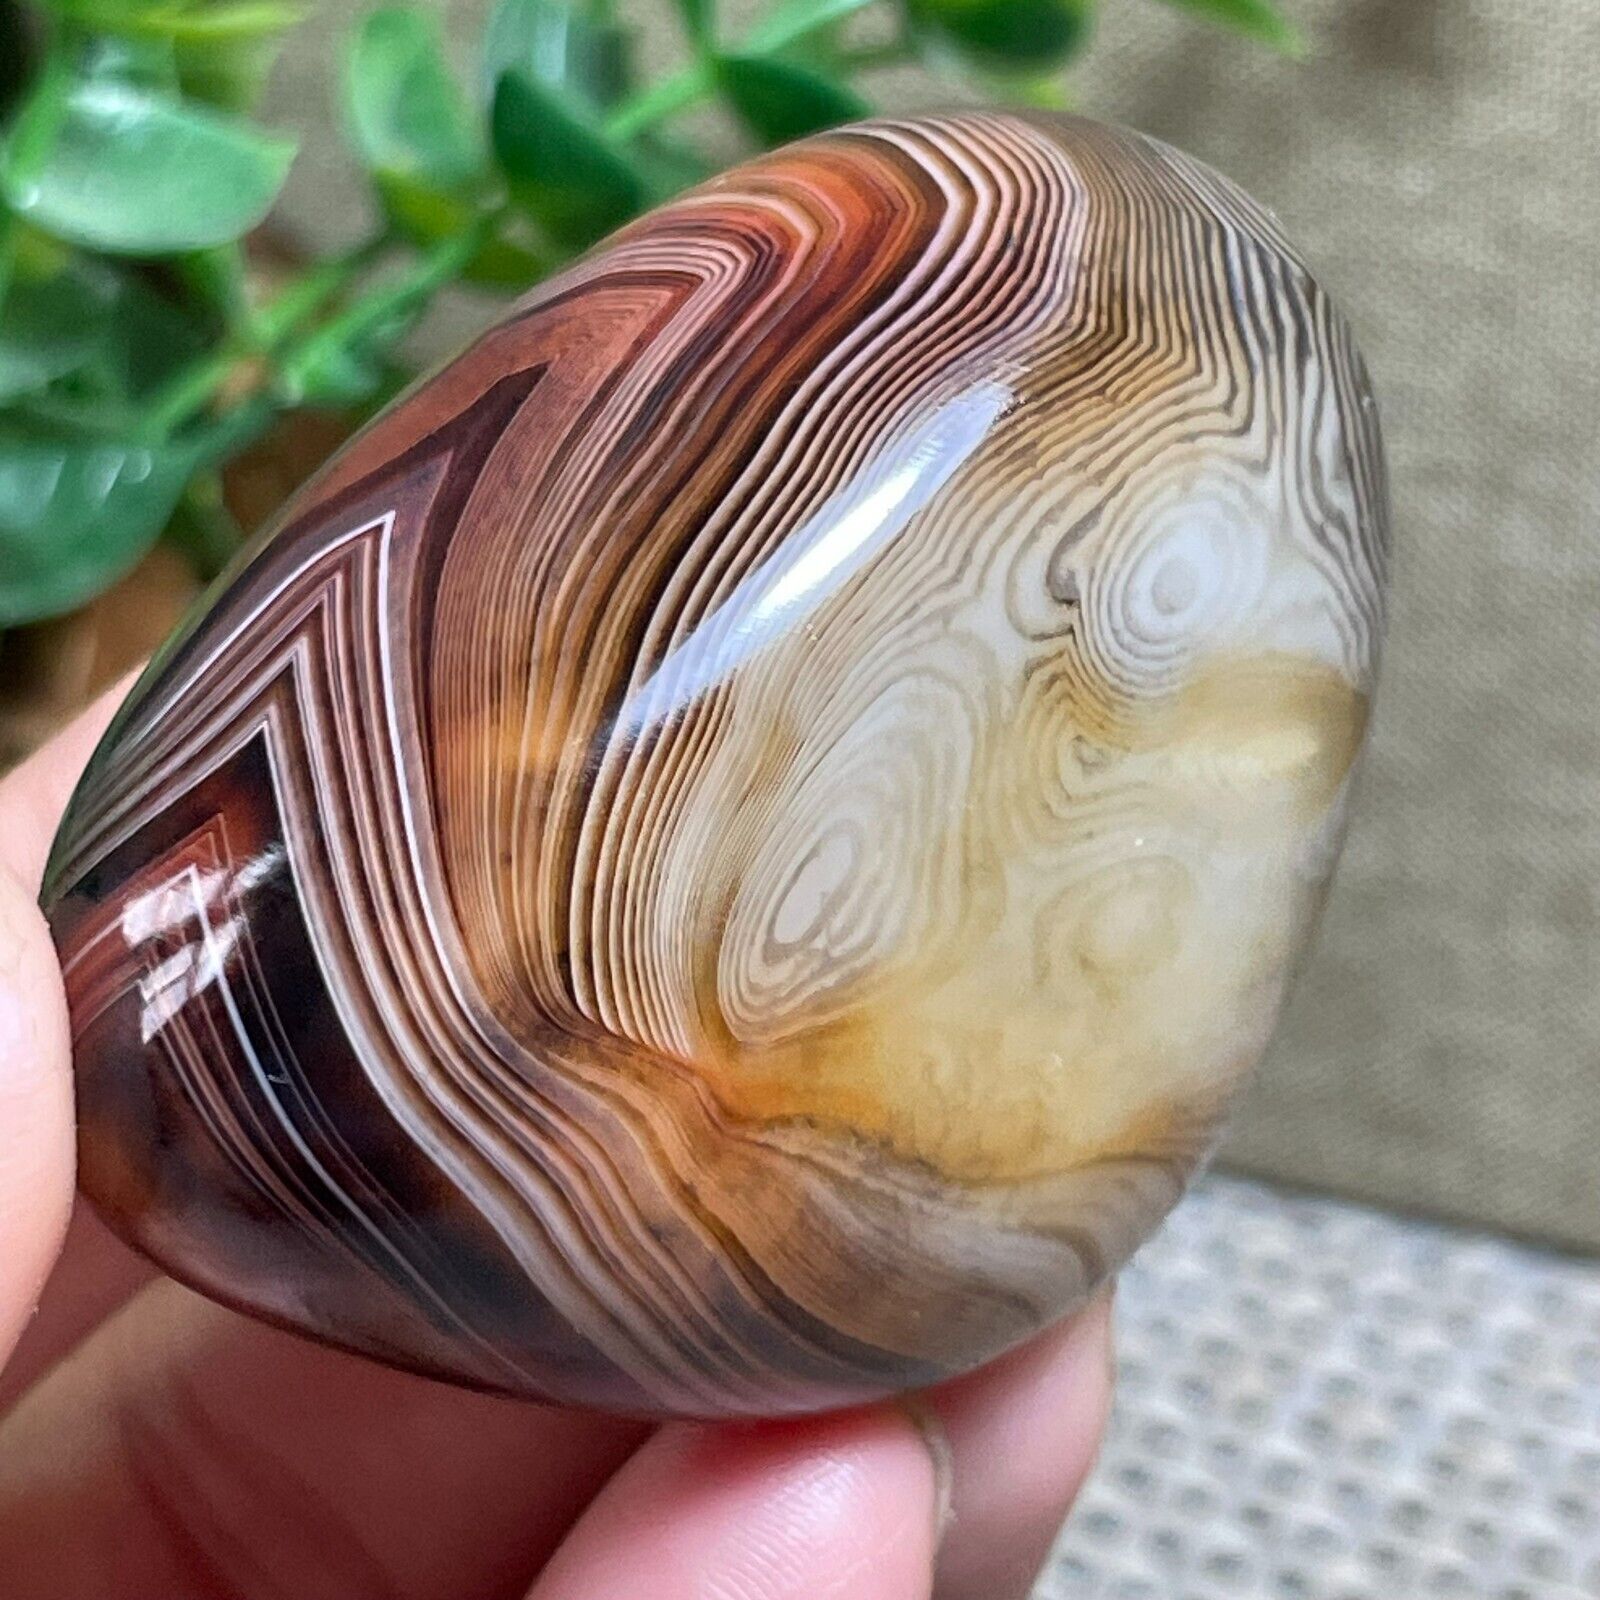 Crazy Lace SILK Banded Agate Polished Crystal Tumbled Stone Madagascar 78g A297